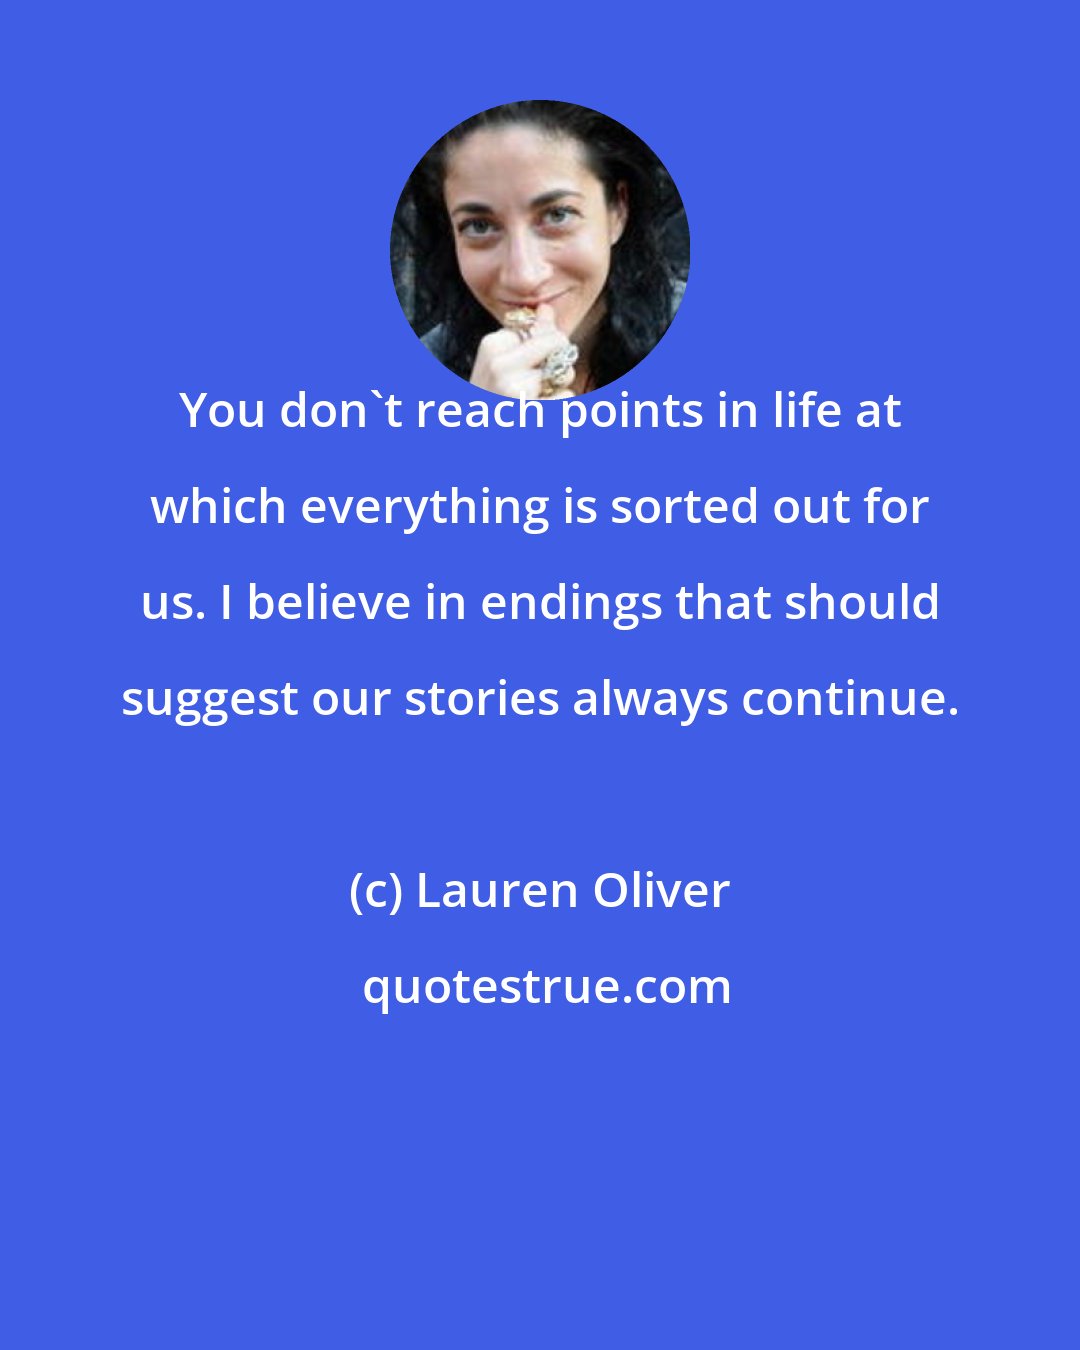 Lauren Oliver: You don't reach points in life at which everything is sorted out for us. I believe in endings that should suggest our stories always continue.